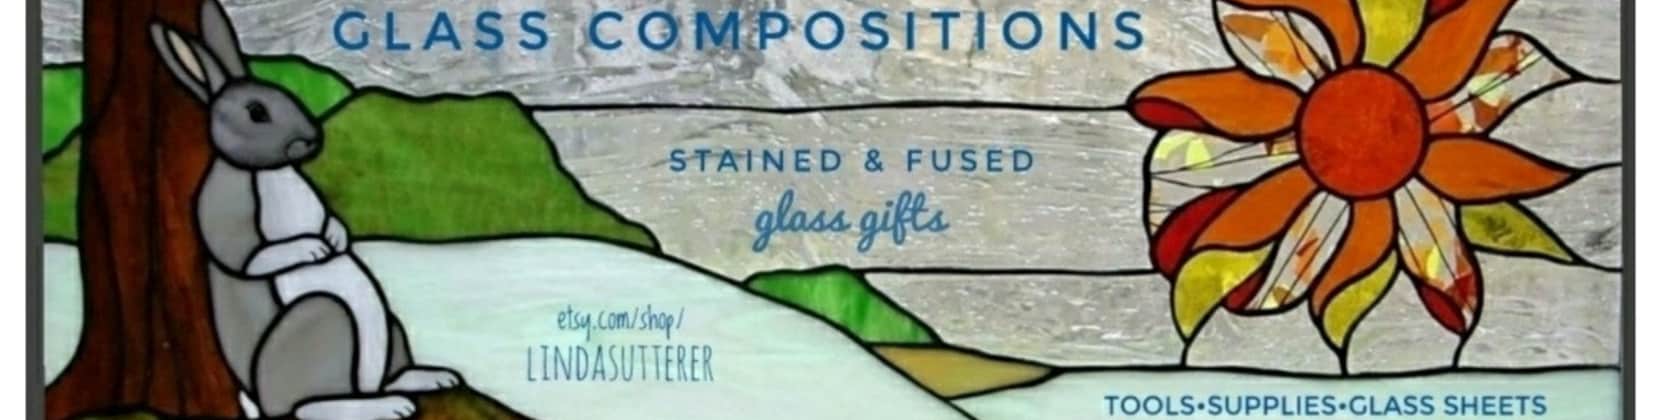 Glasscompositions, Fused and Stained Glass